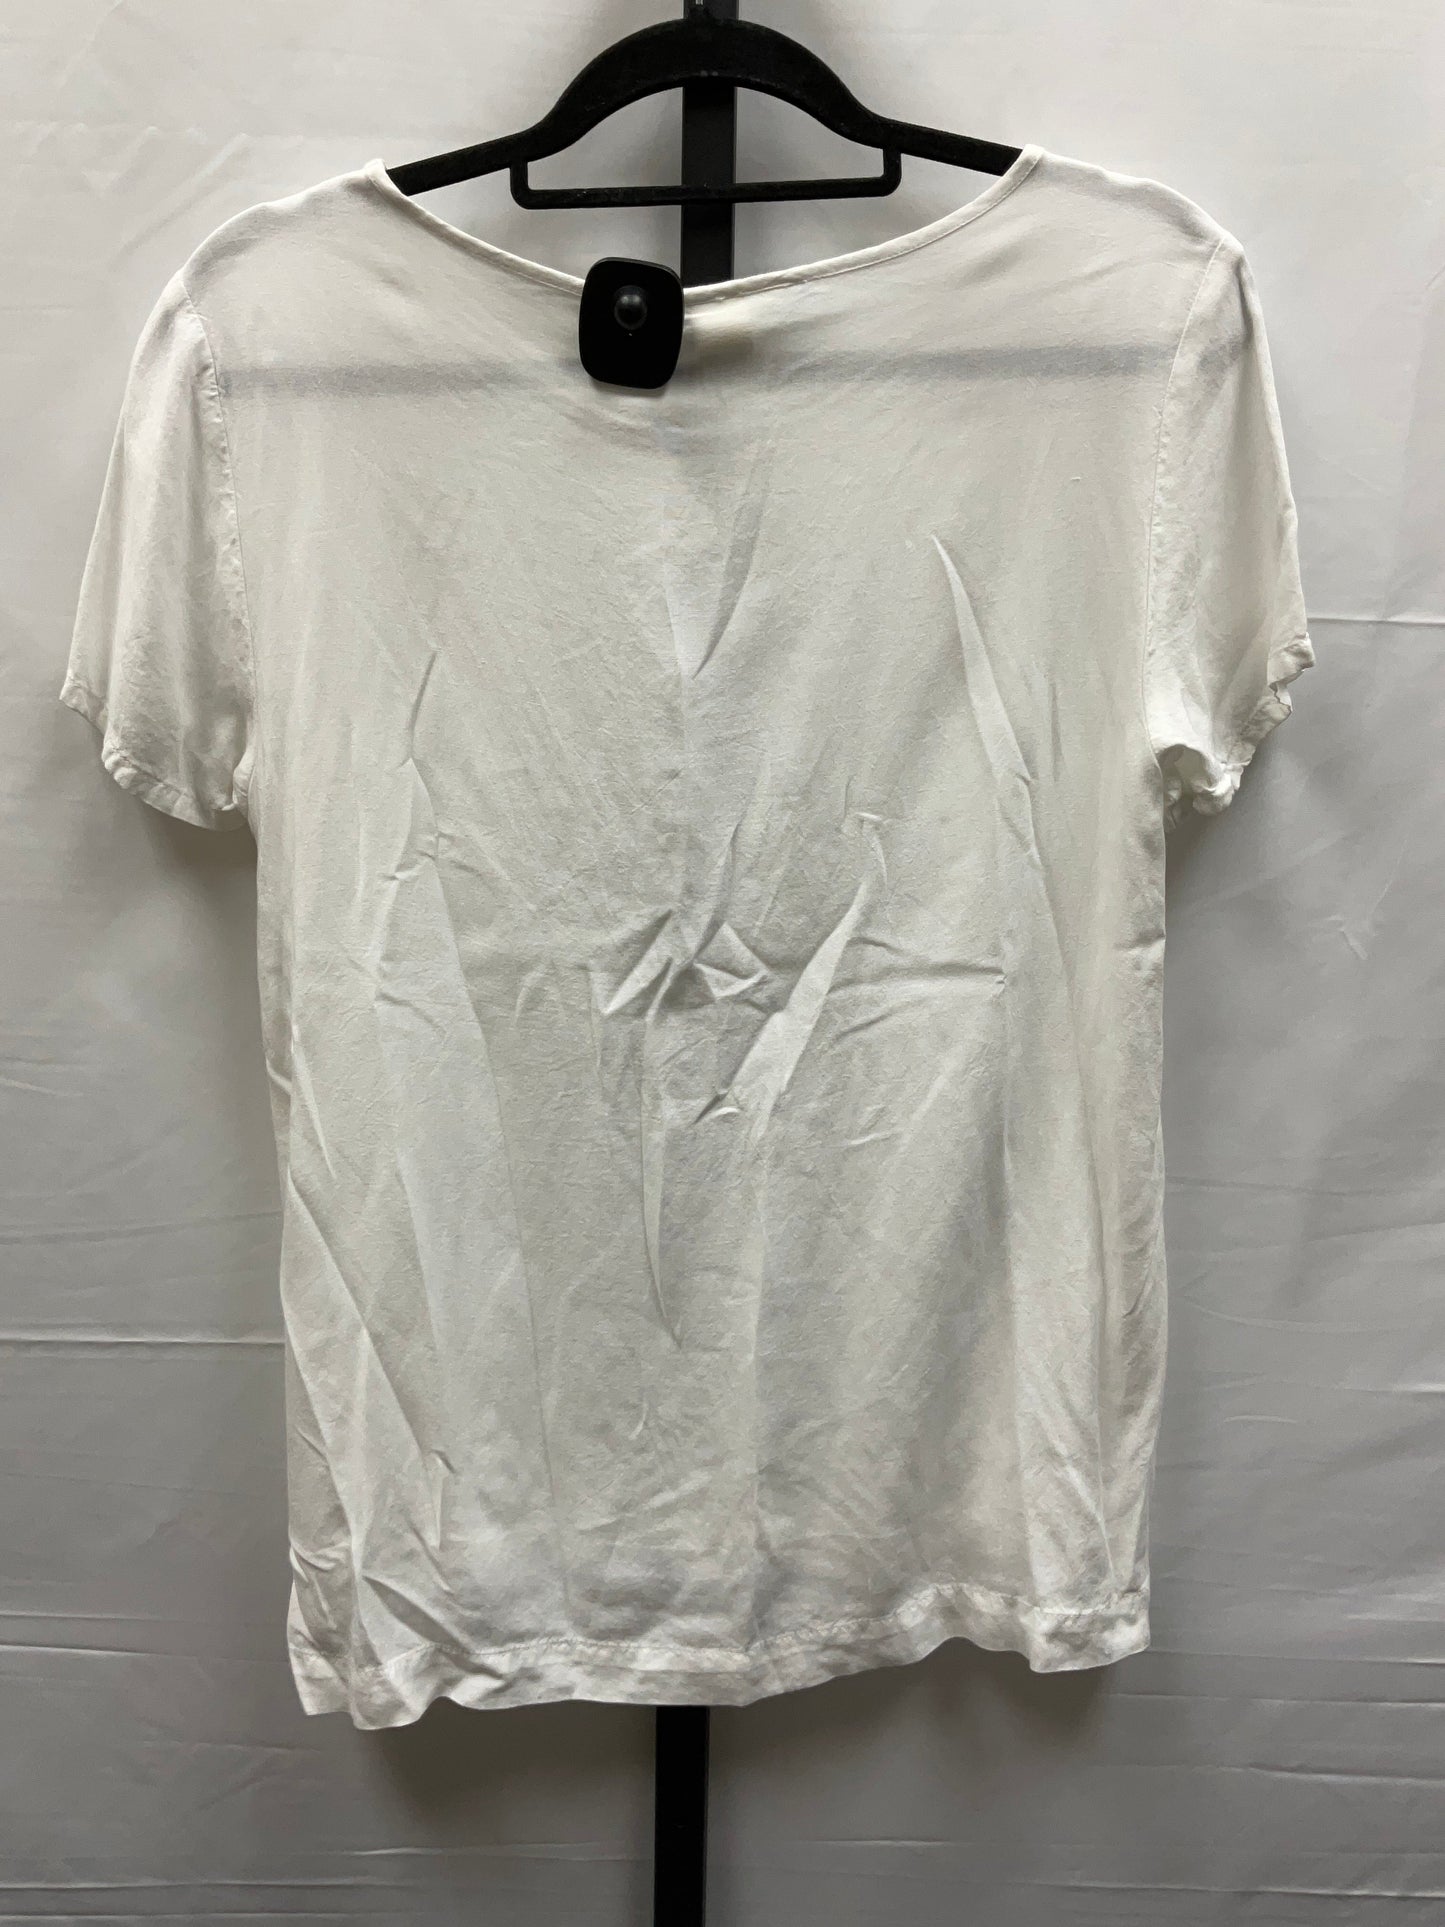 White Top Short Sleeve H&m, Size M